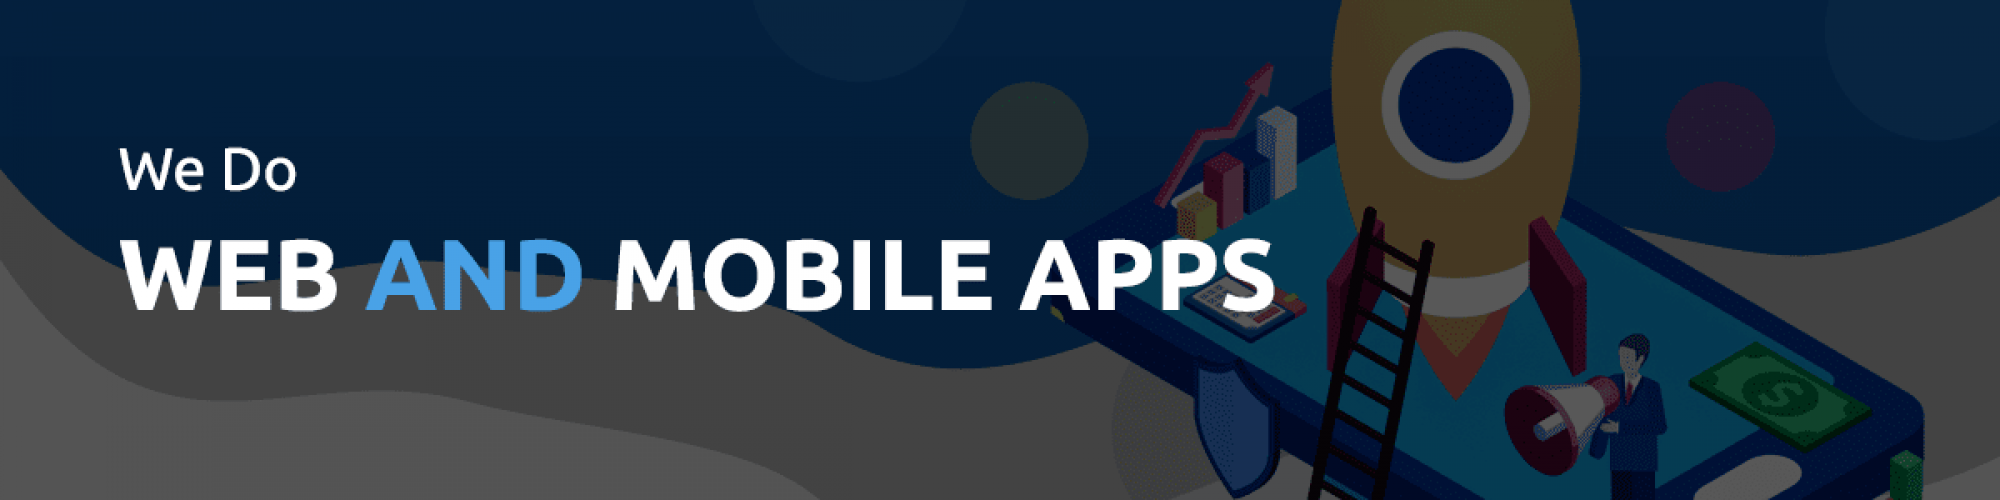 Hire Mobile App Development Agency in Dallas | Android | iOS